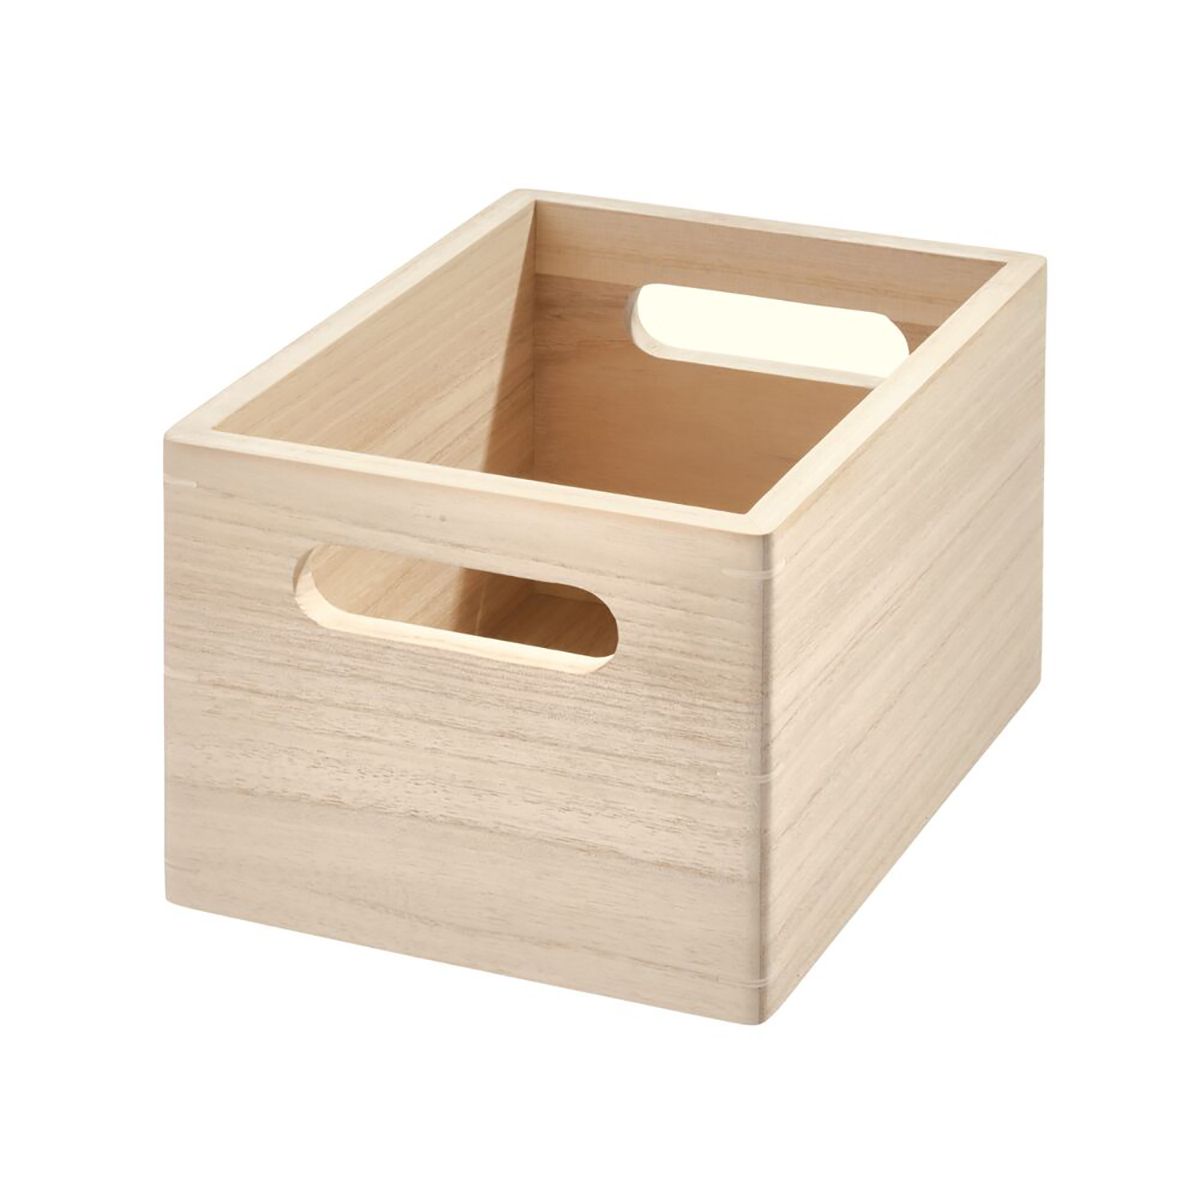 THE HOME EDIT Narrow Wooden All-Purpose Bin Sand | The Container Store